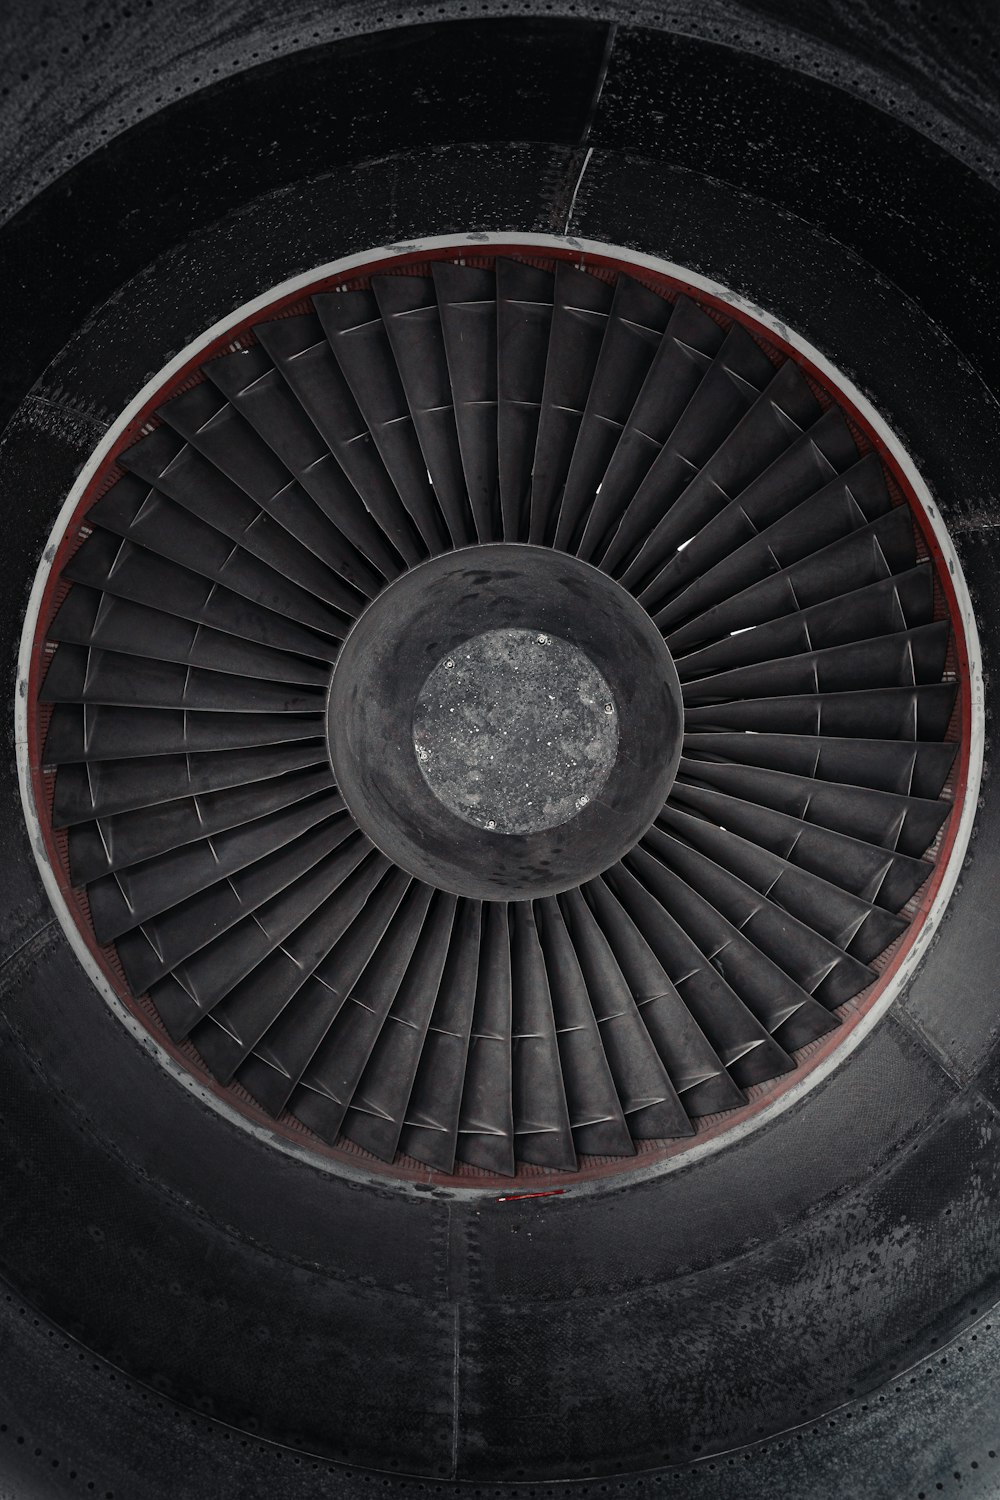 a close up view of a jet engine